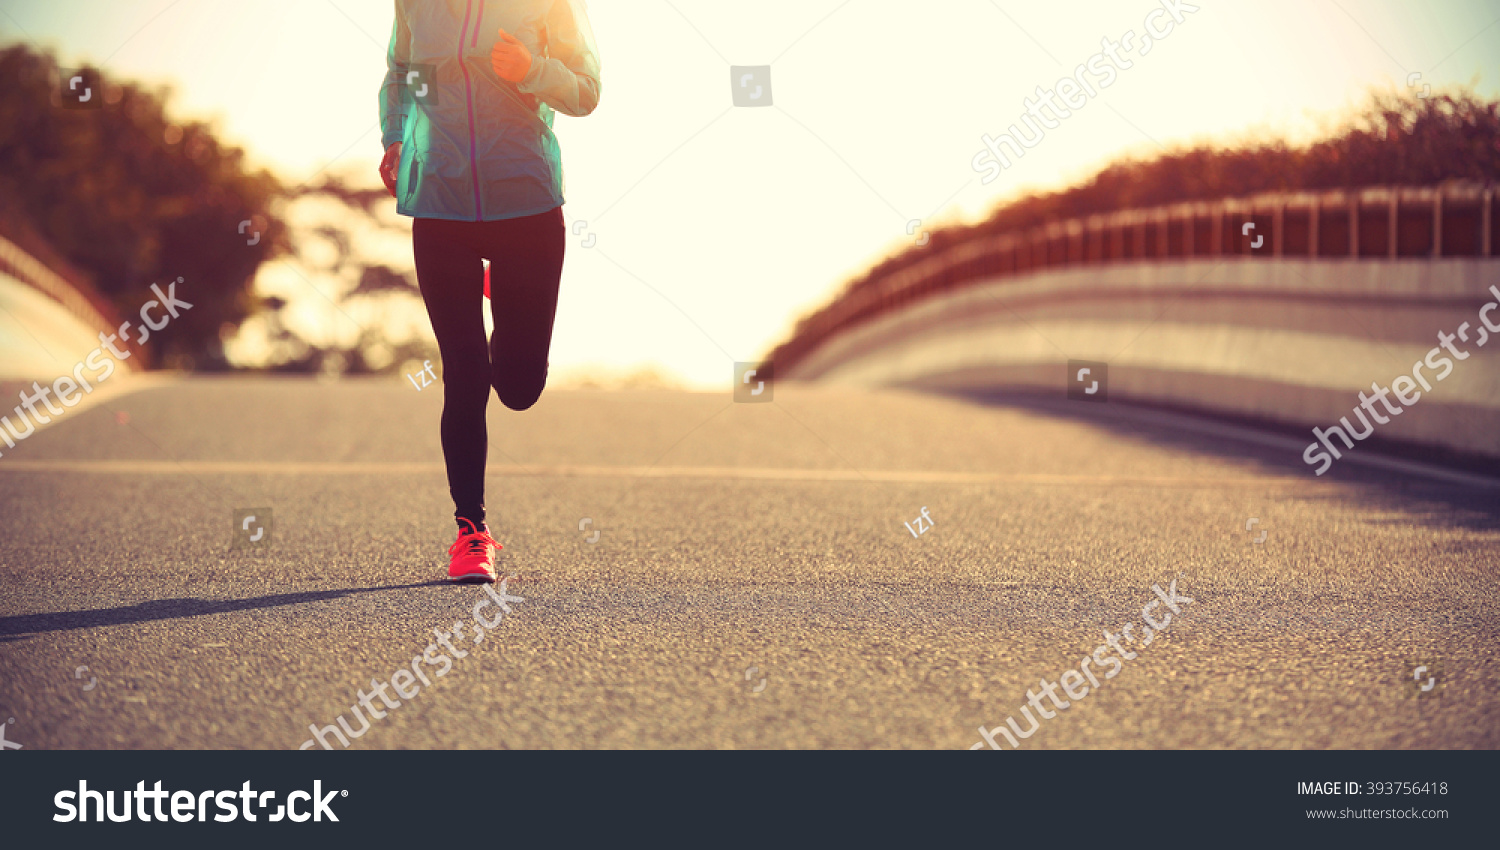 young fitness woman runner running on sunrise road #393756418